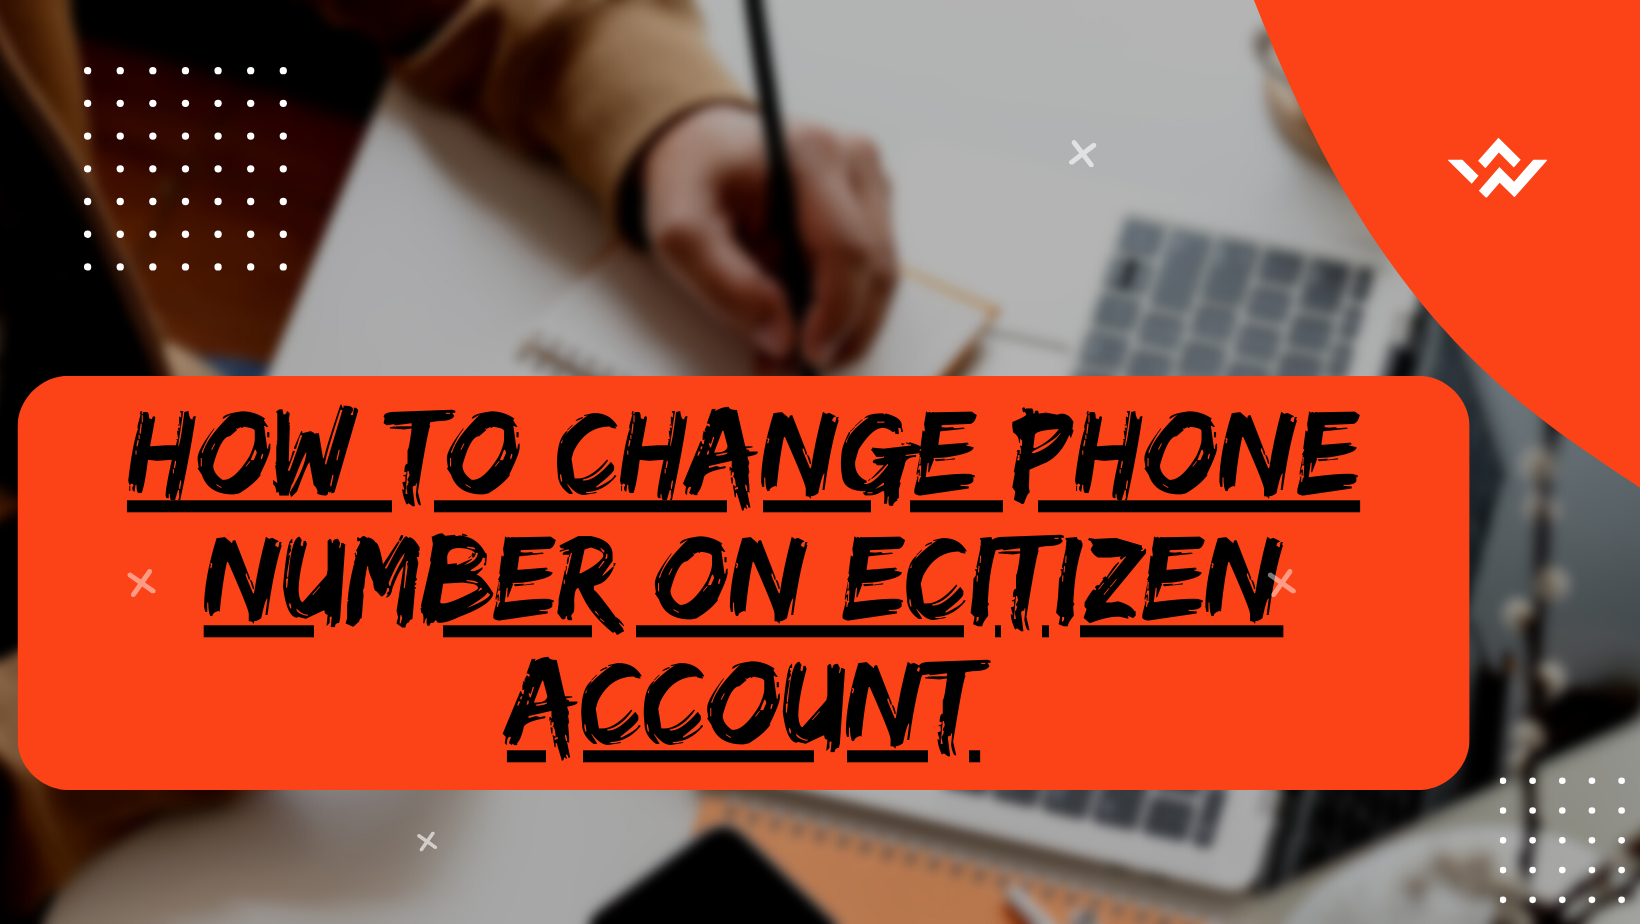 How To Change Phone Number On eCitizen Account